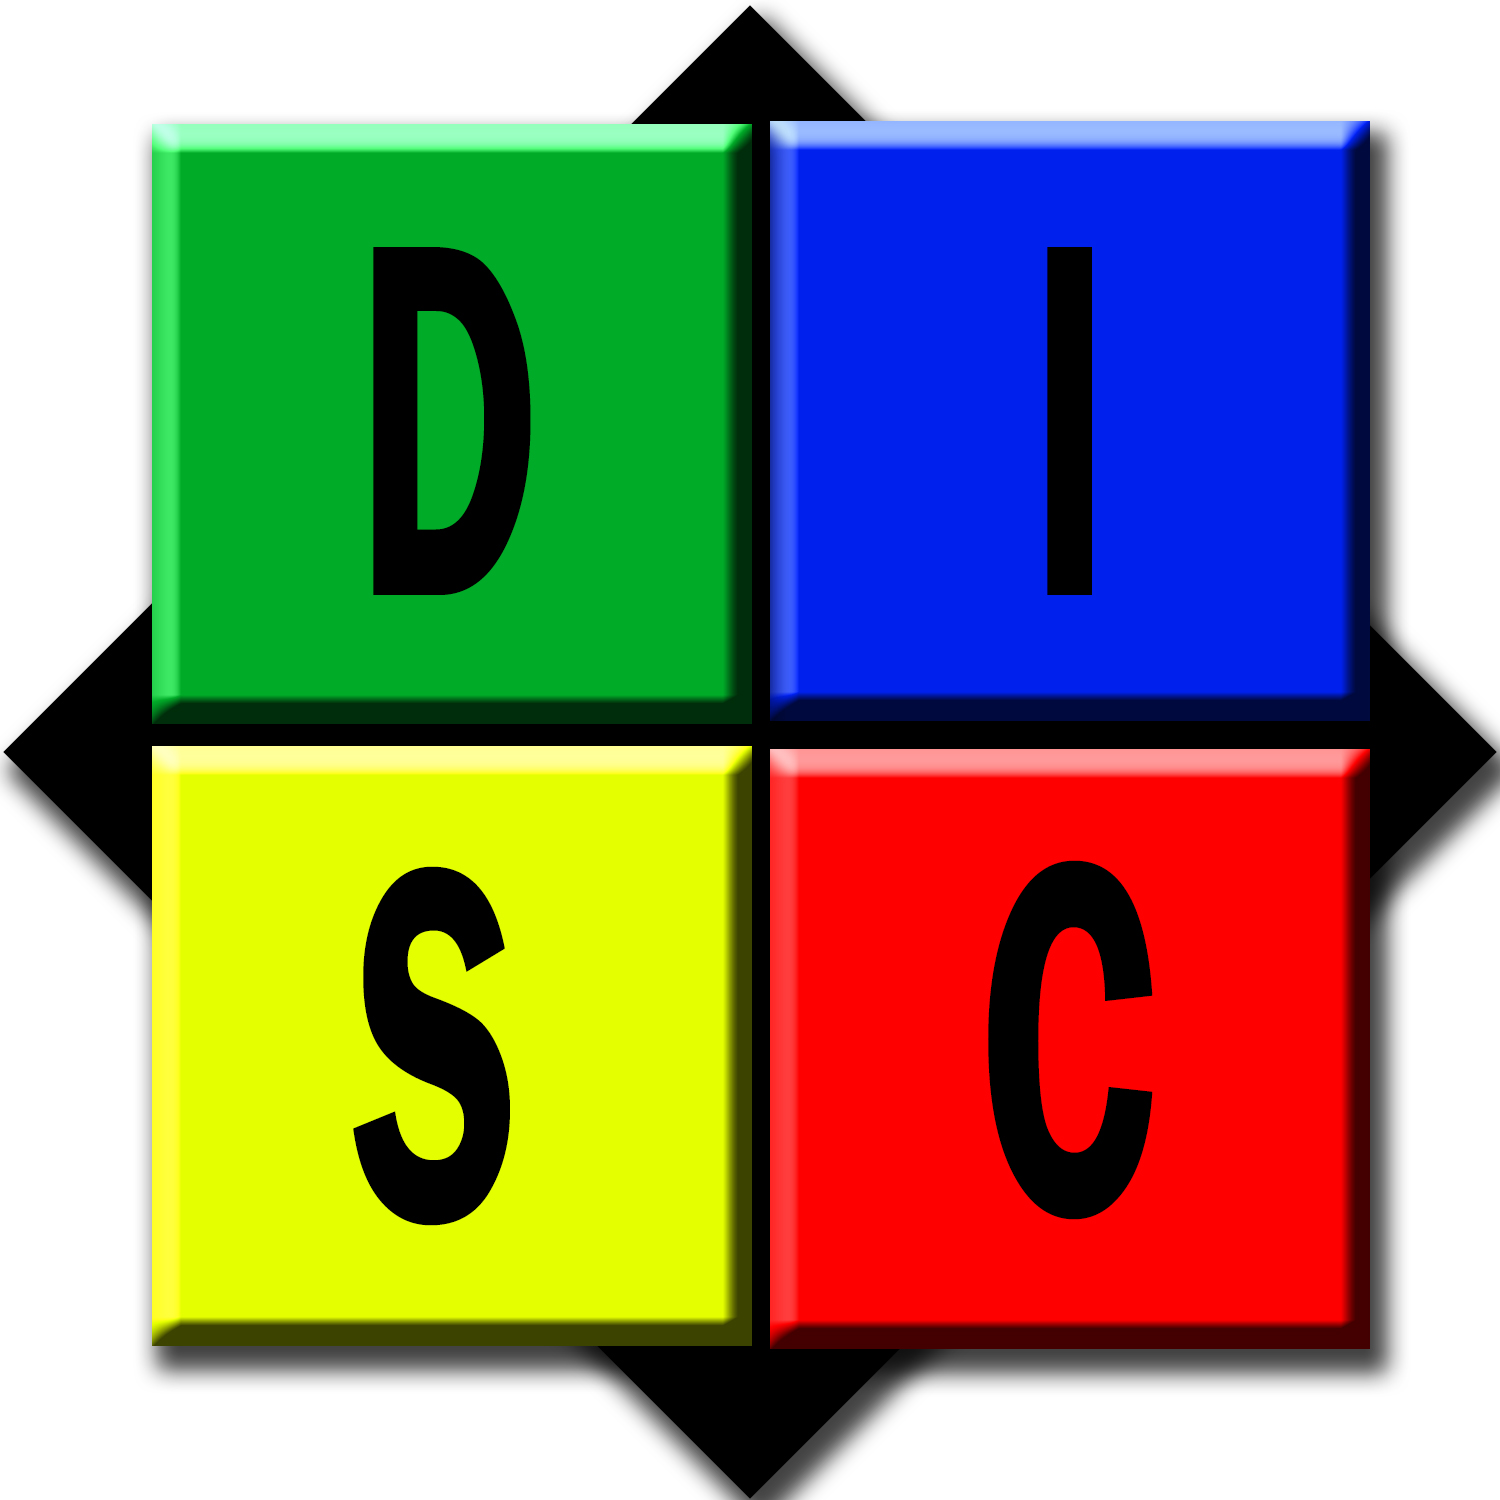 DISC Personality Test - Personal Insights Profile - is a Personality Type Test used for understanding behaviors associated with its personality type profile